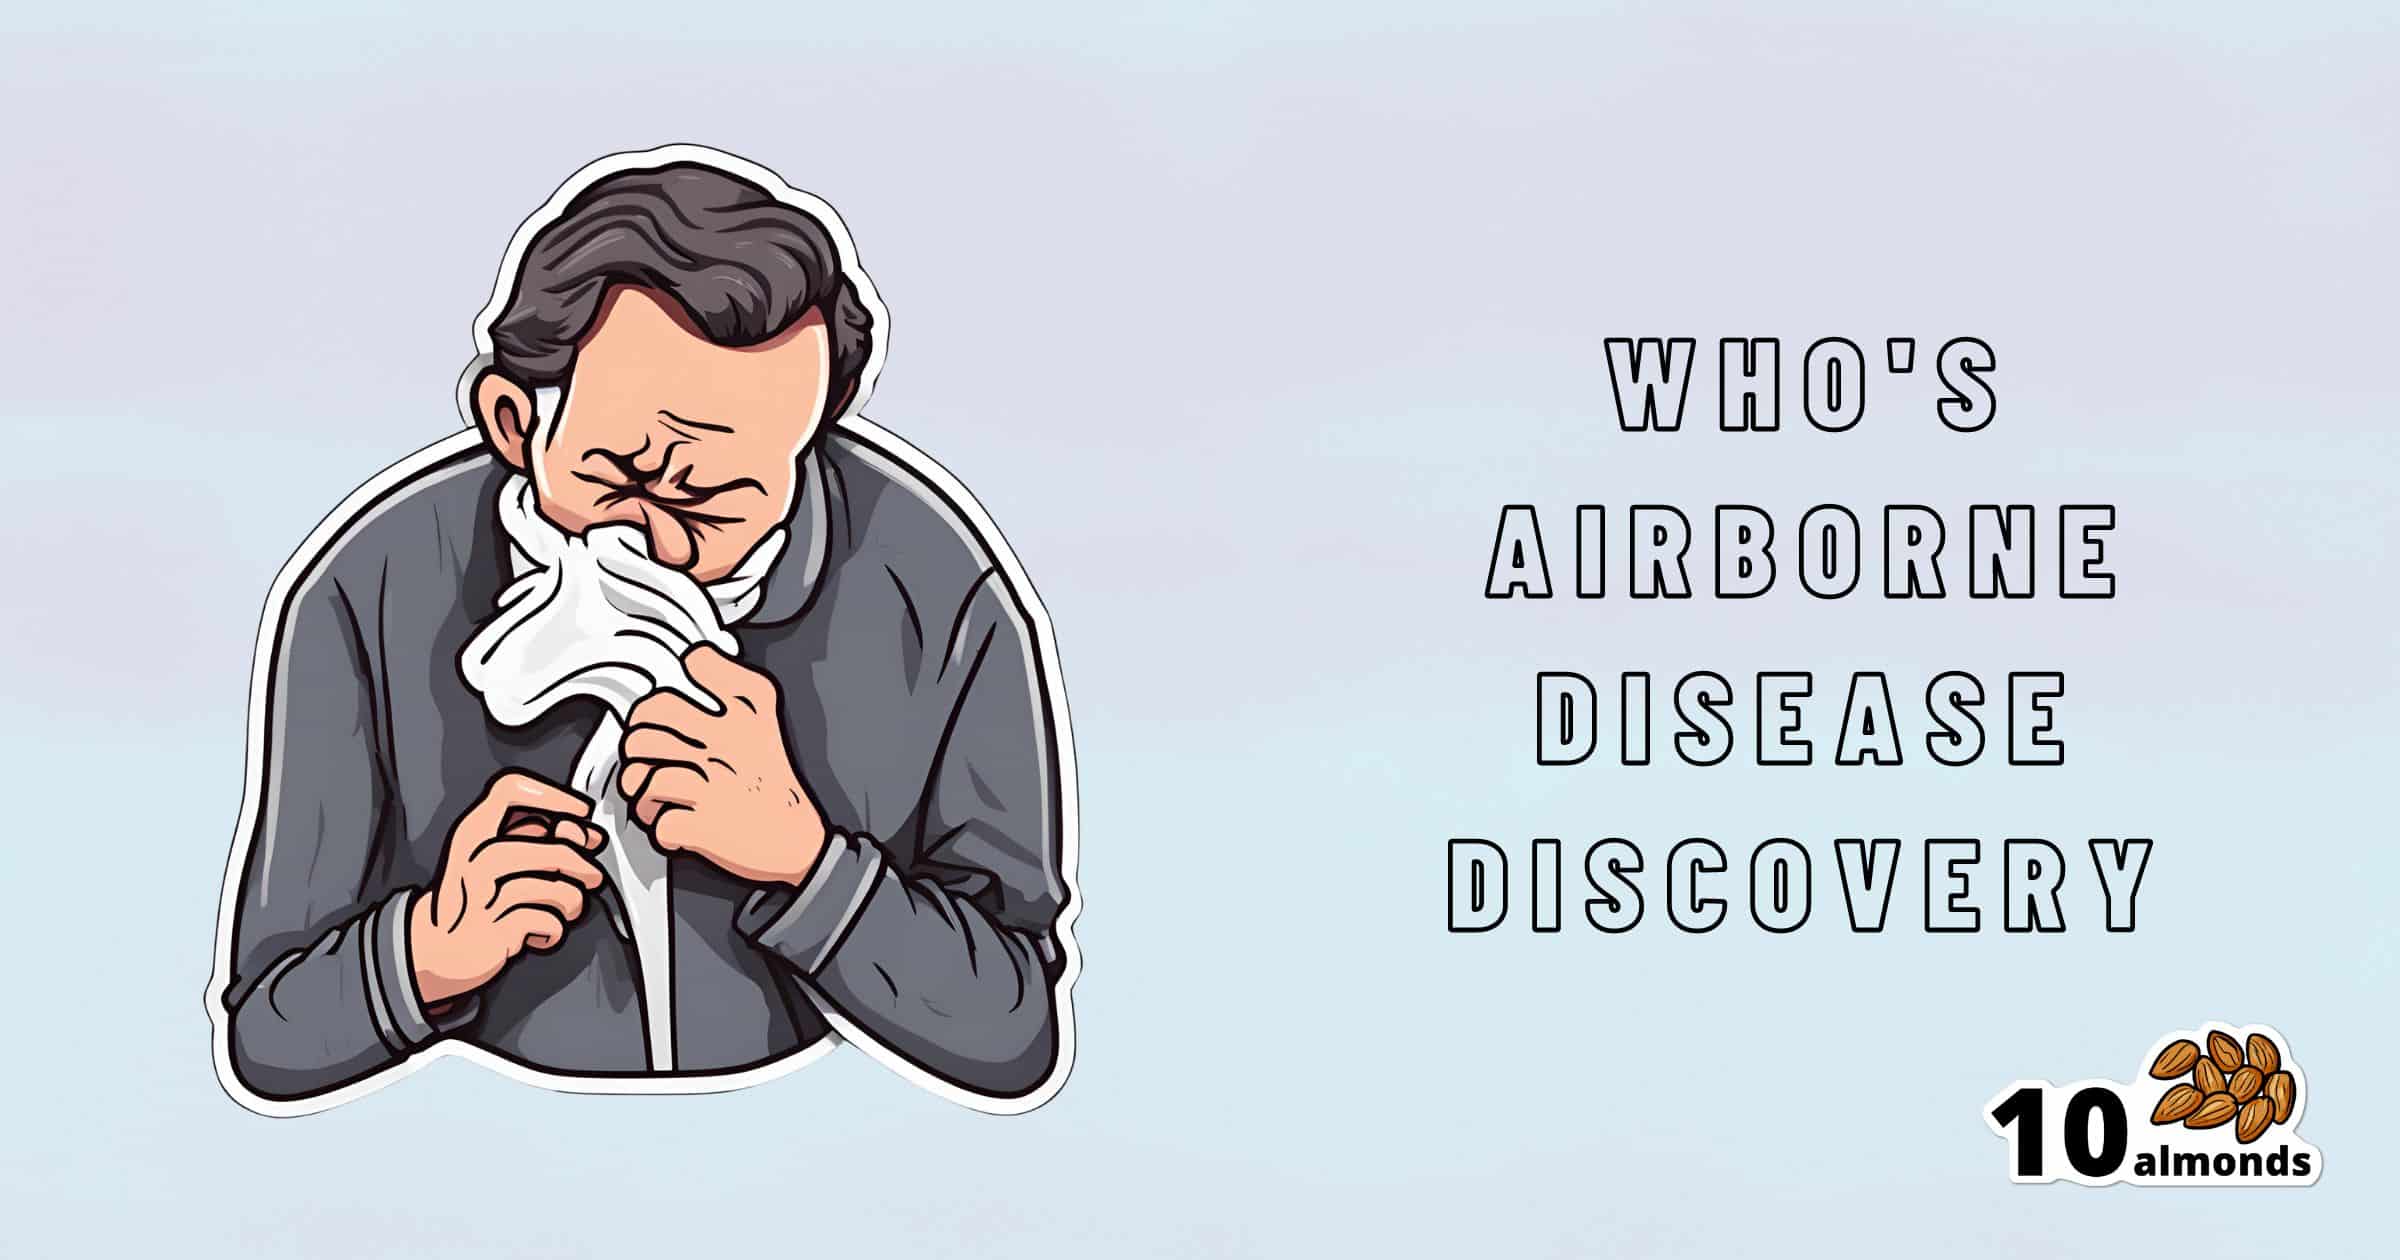 Illustration of a man sneezing into a tissue on the left, with the text "WHO'S AIRBORNE DISEASE DISCOVERY" on the right, highlighting critical information about airborne disease spread. There is a small logo with "10 almonds" and an image of almonds in the bottom right corner.